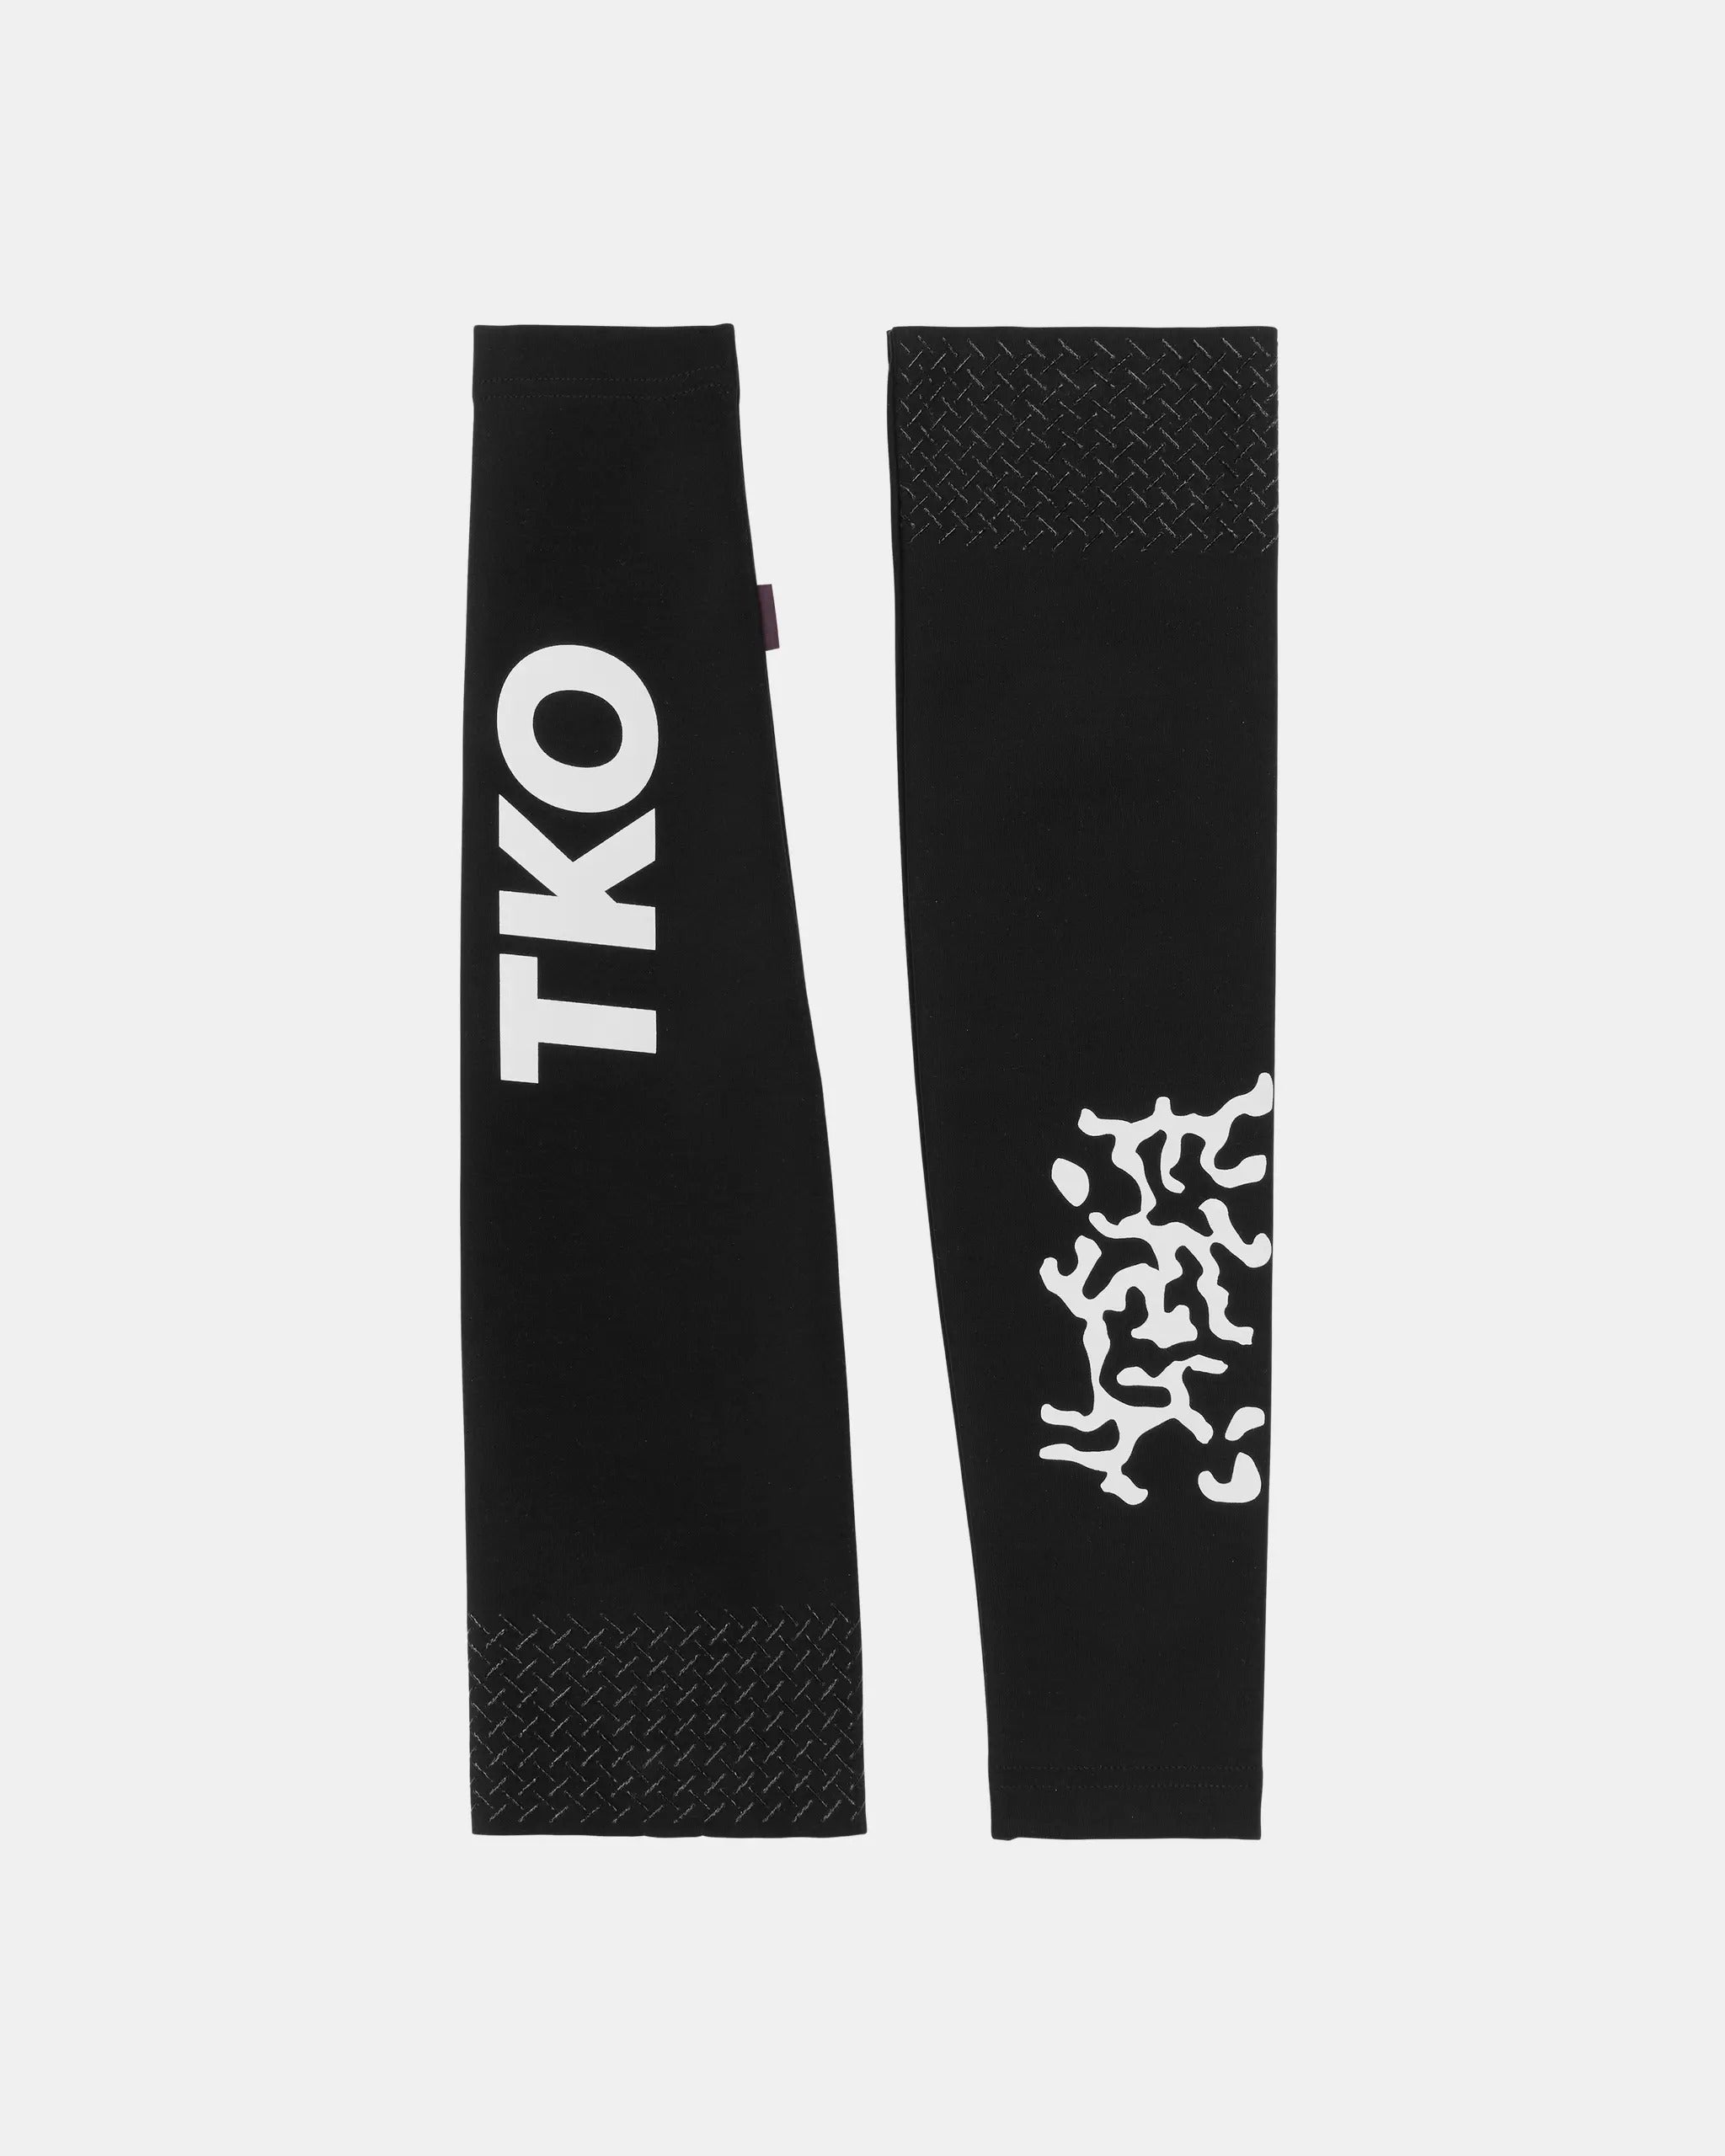 T.K.O. Arm Warmers<BR/>